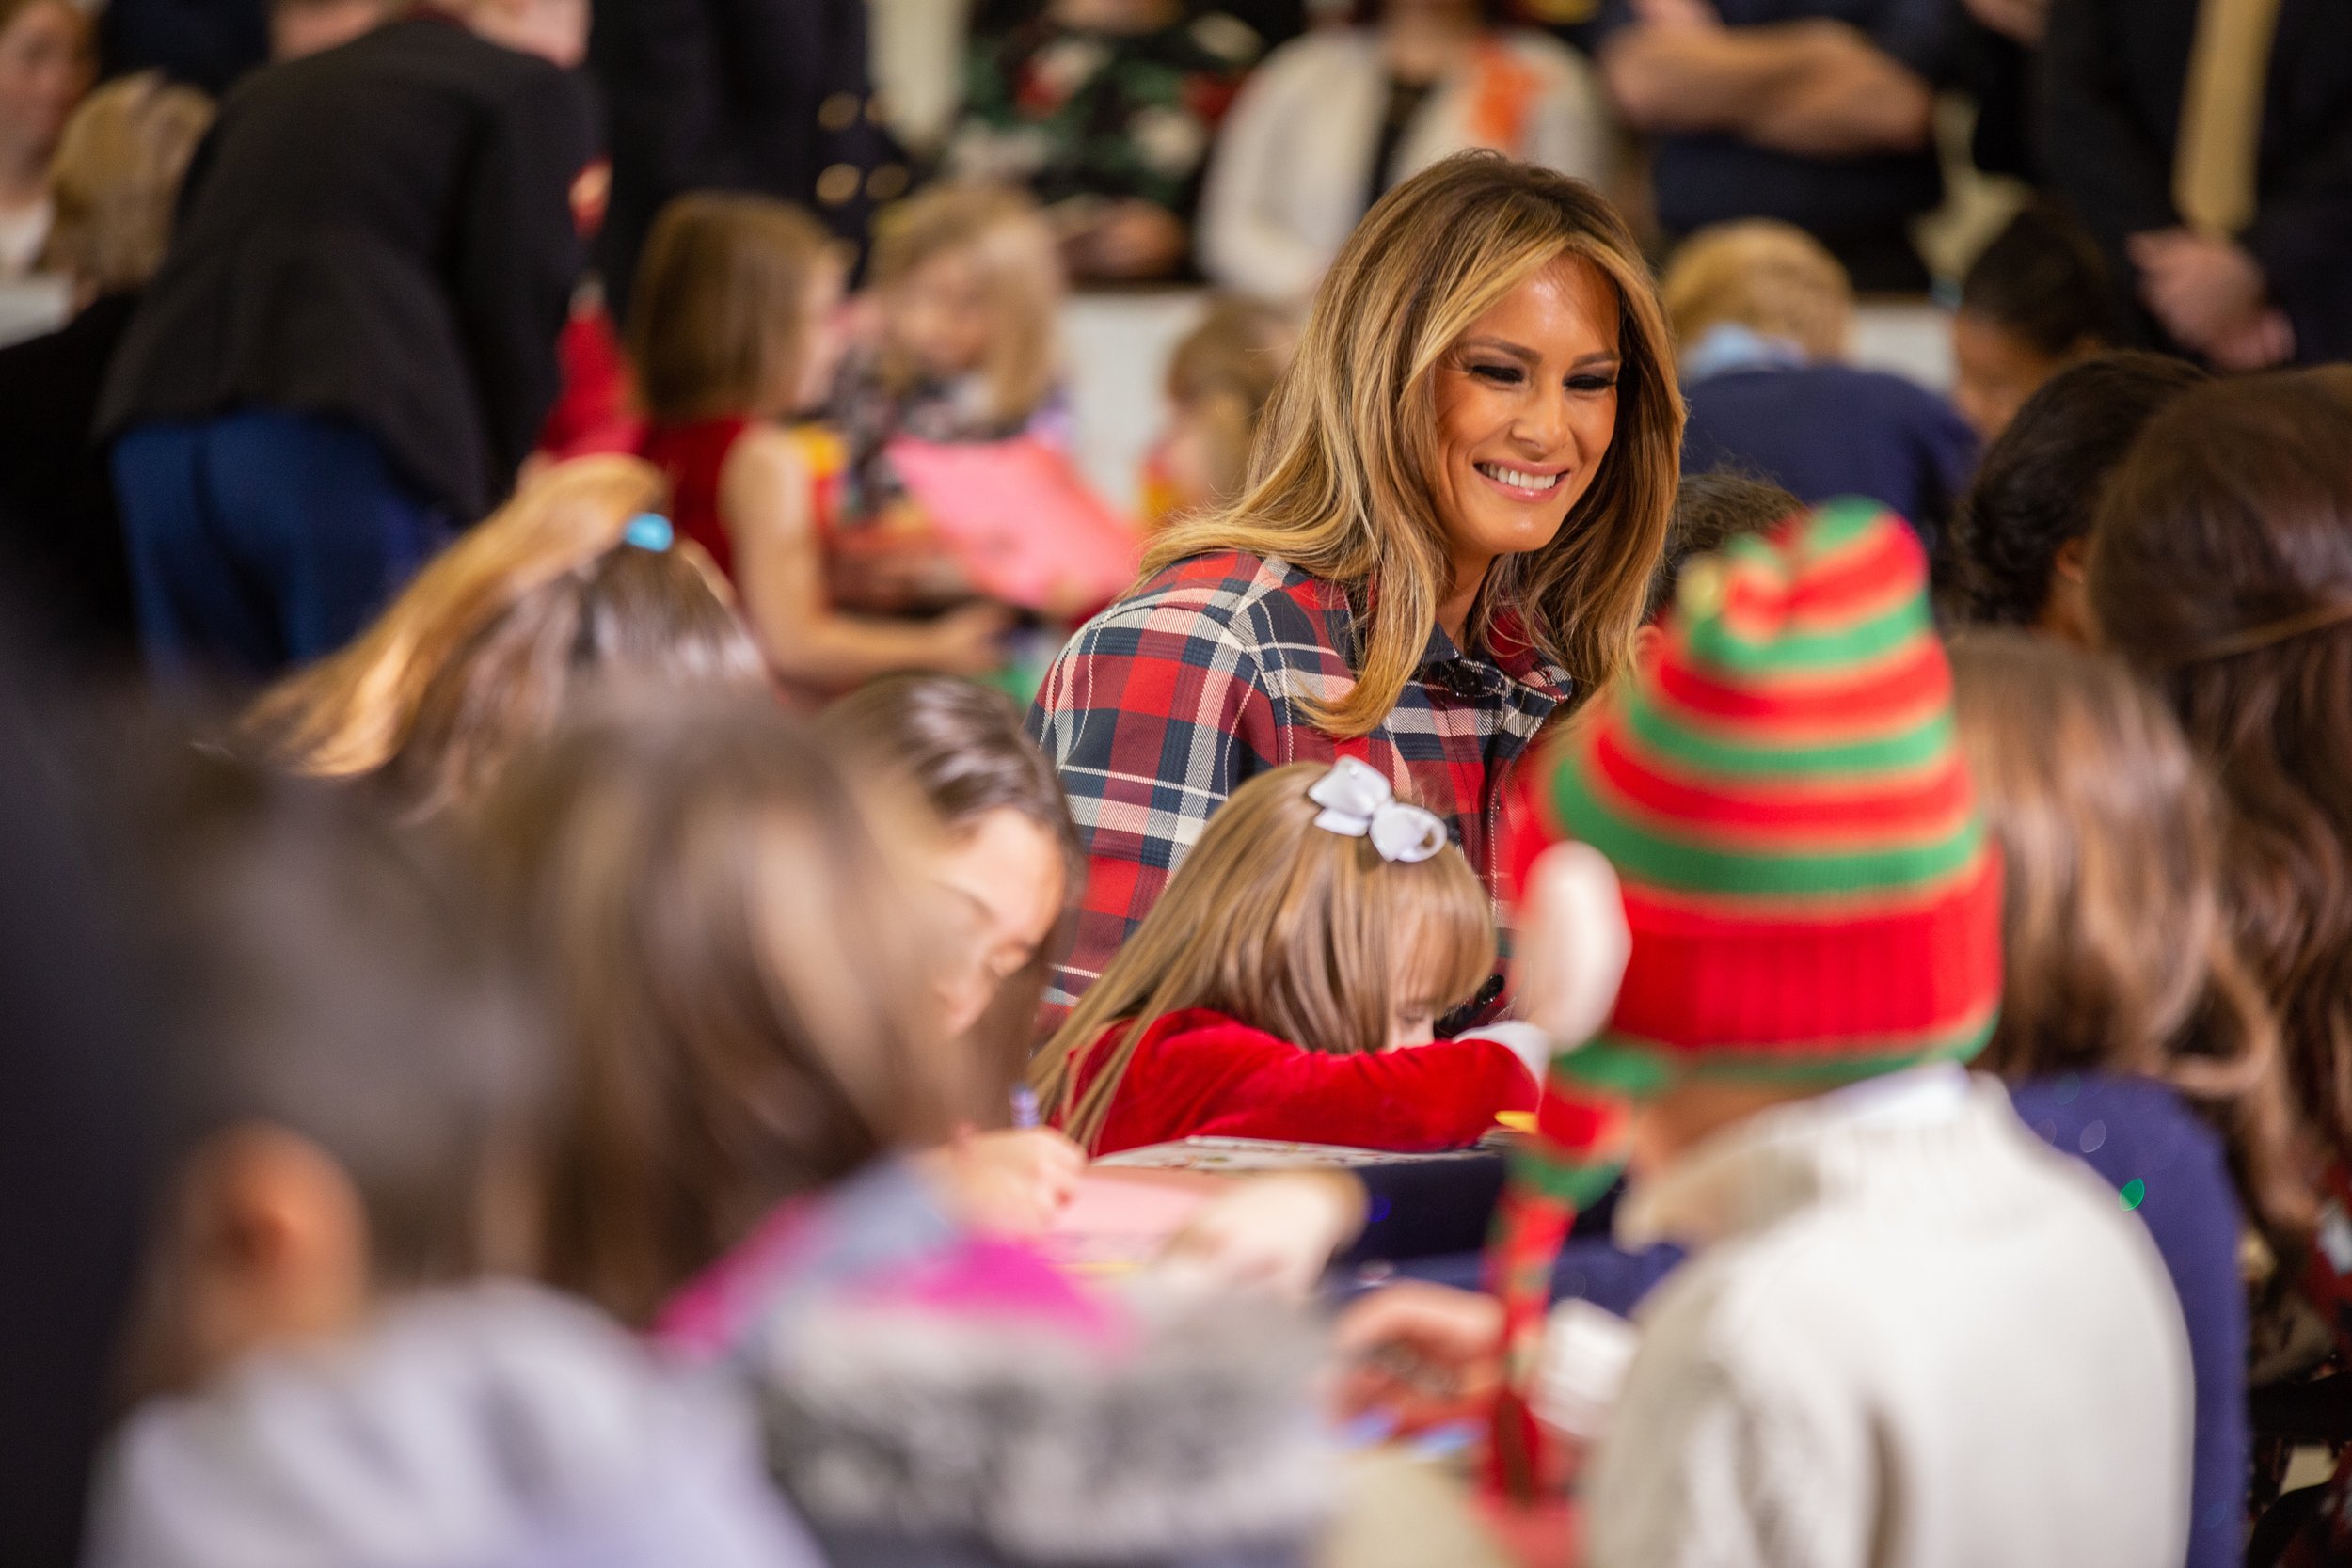  First Lady Melania Trump helps children write Christmas cards during the Marine Corps Toys for Tots event.    December 2018   